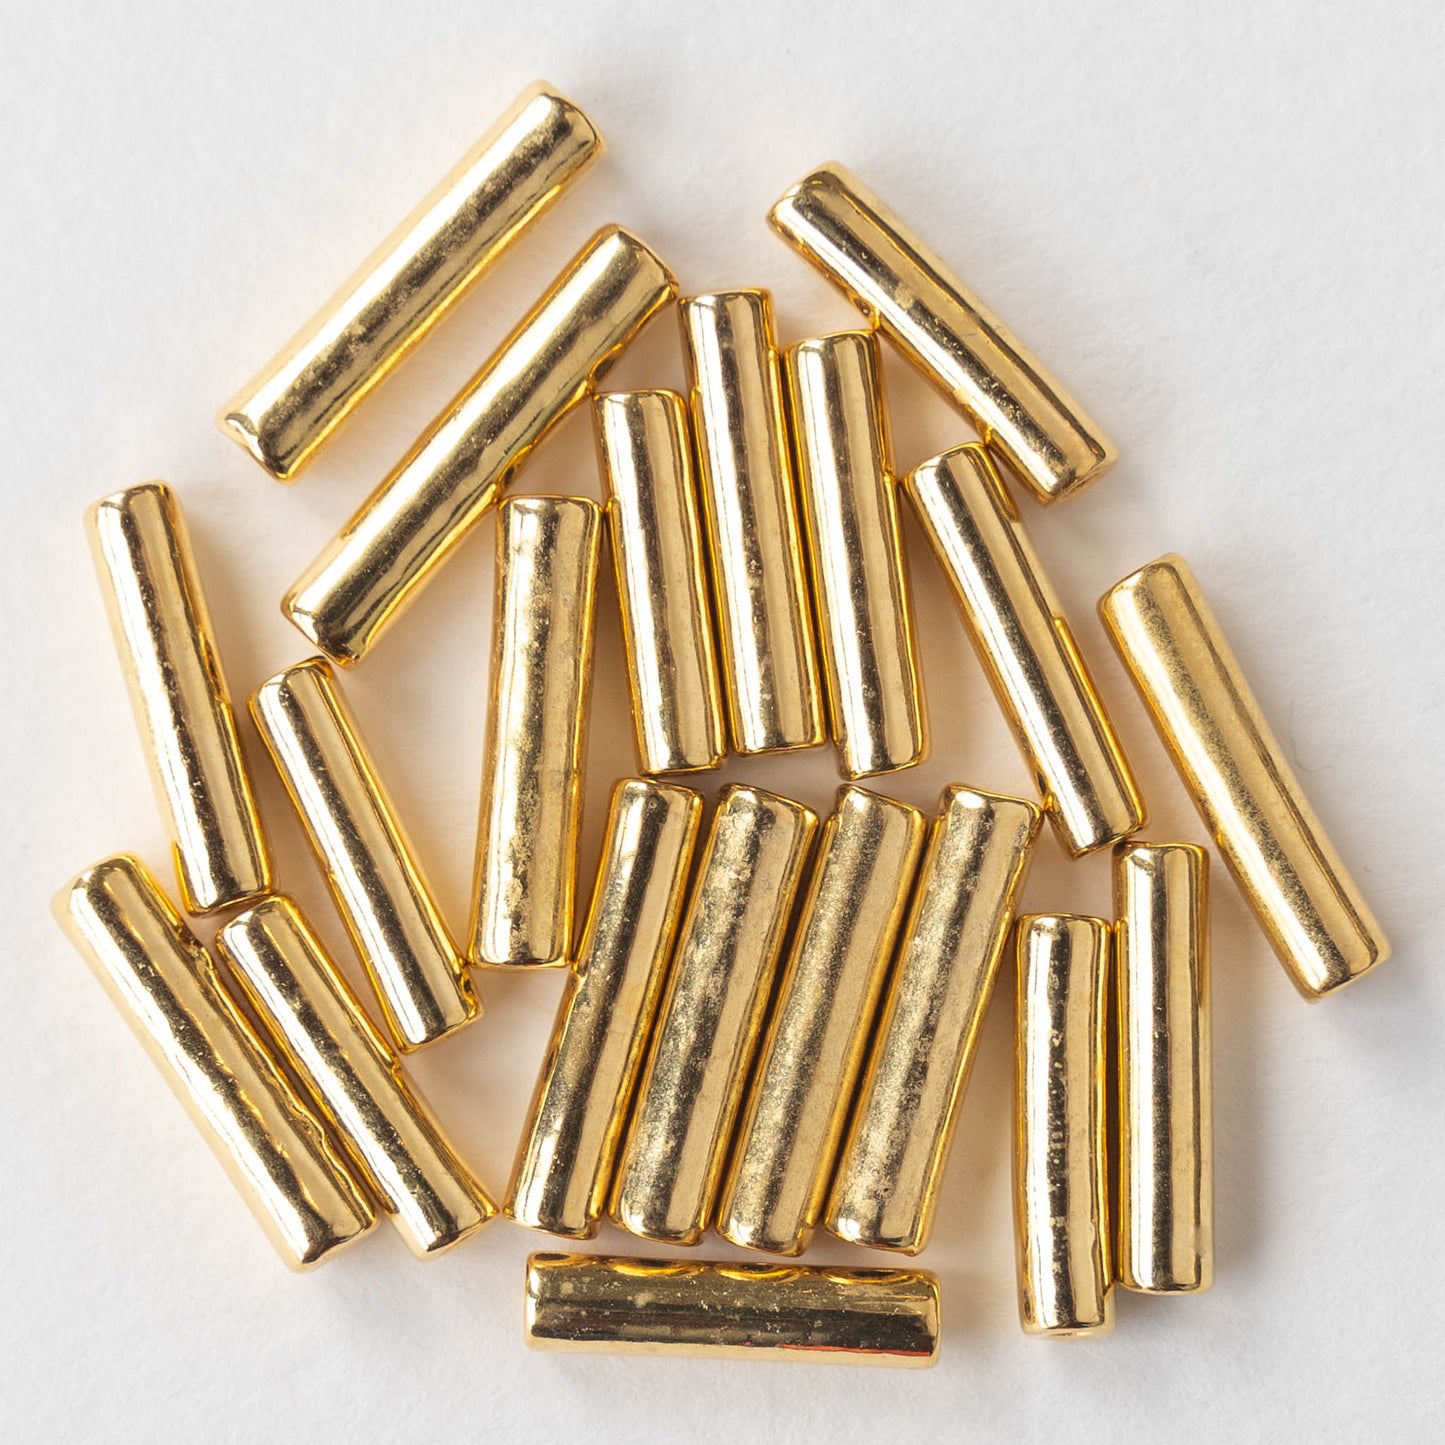 3.5x16mm 24K Gold Coated Ceramic Tube Beads - Gold - 10 or 20